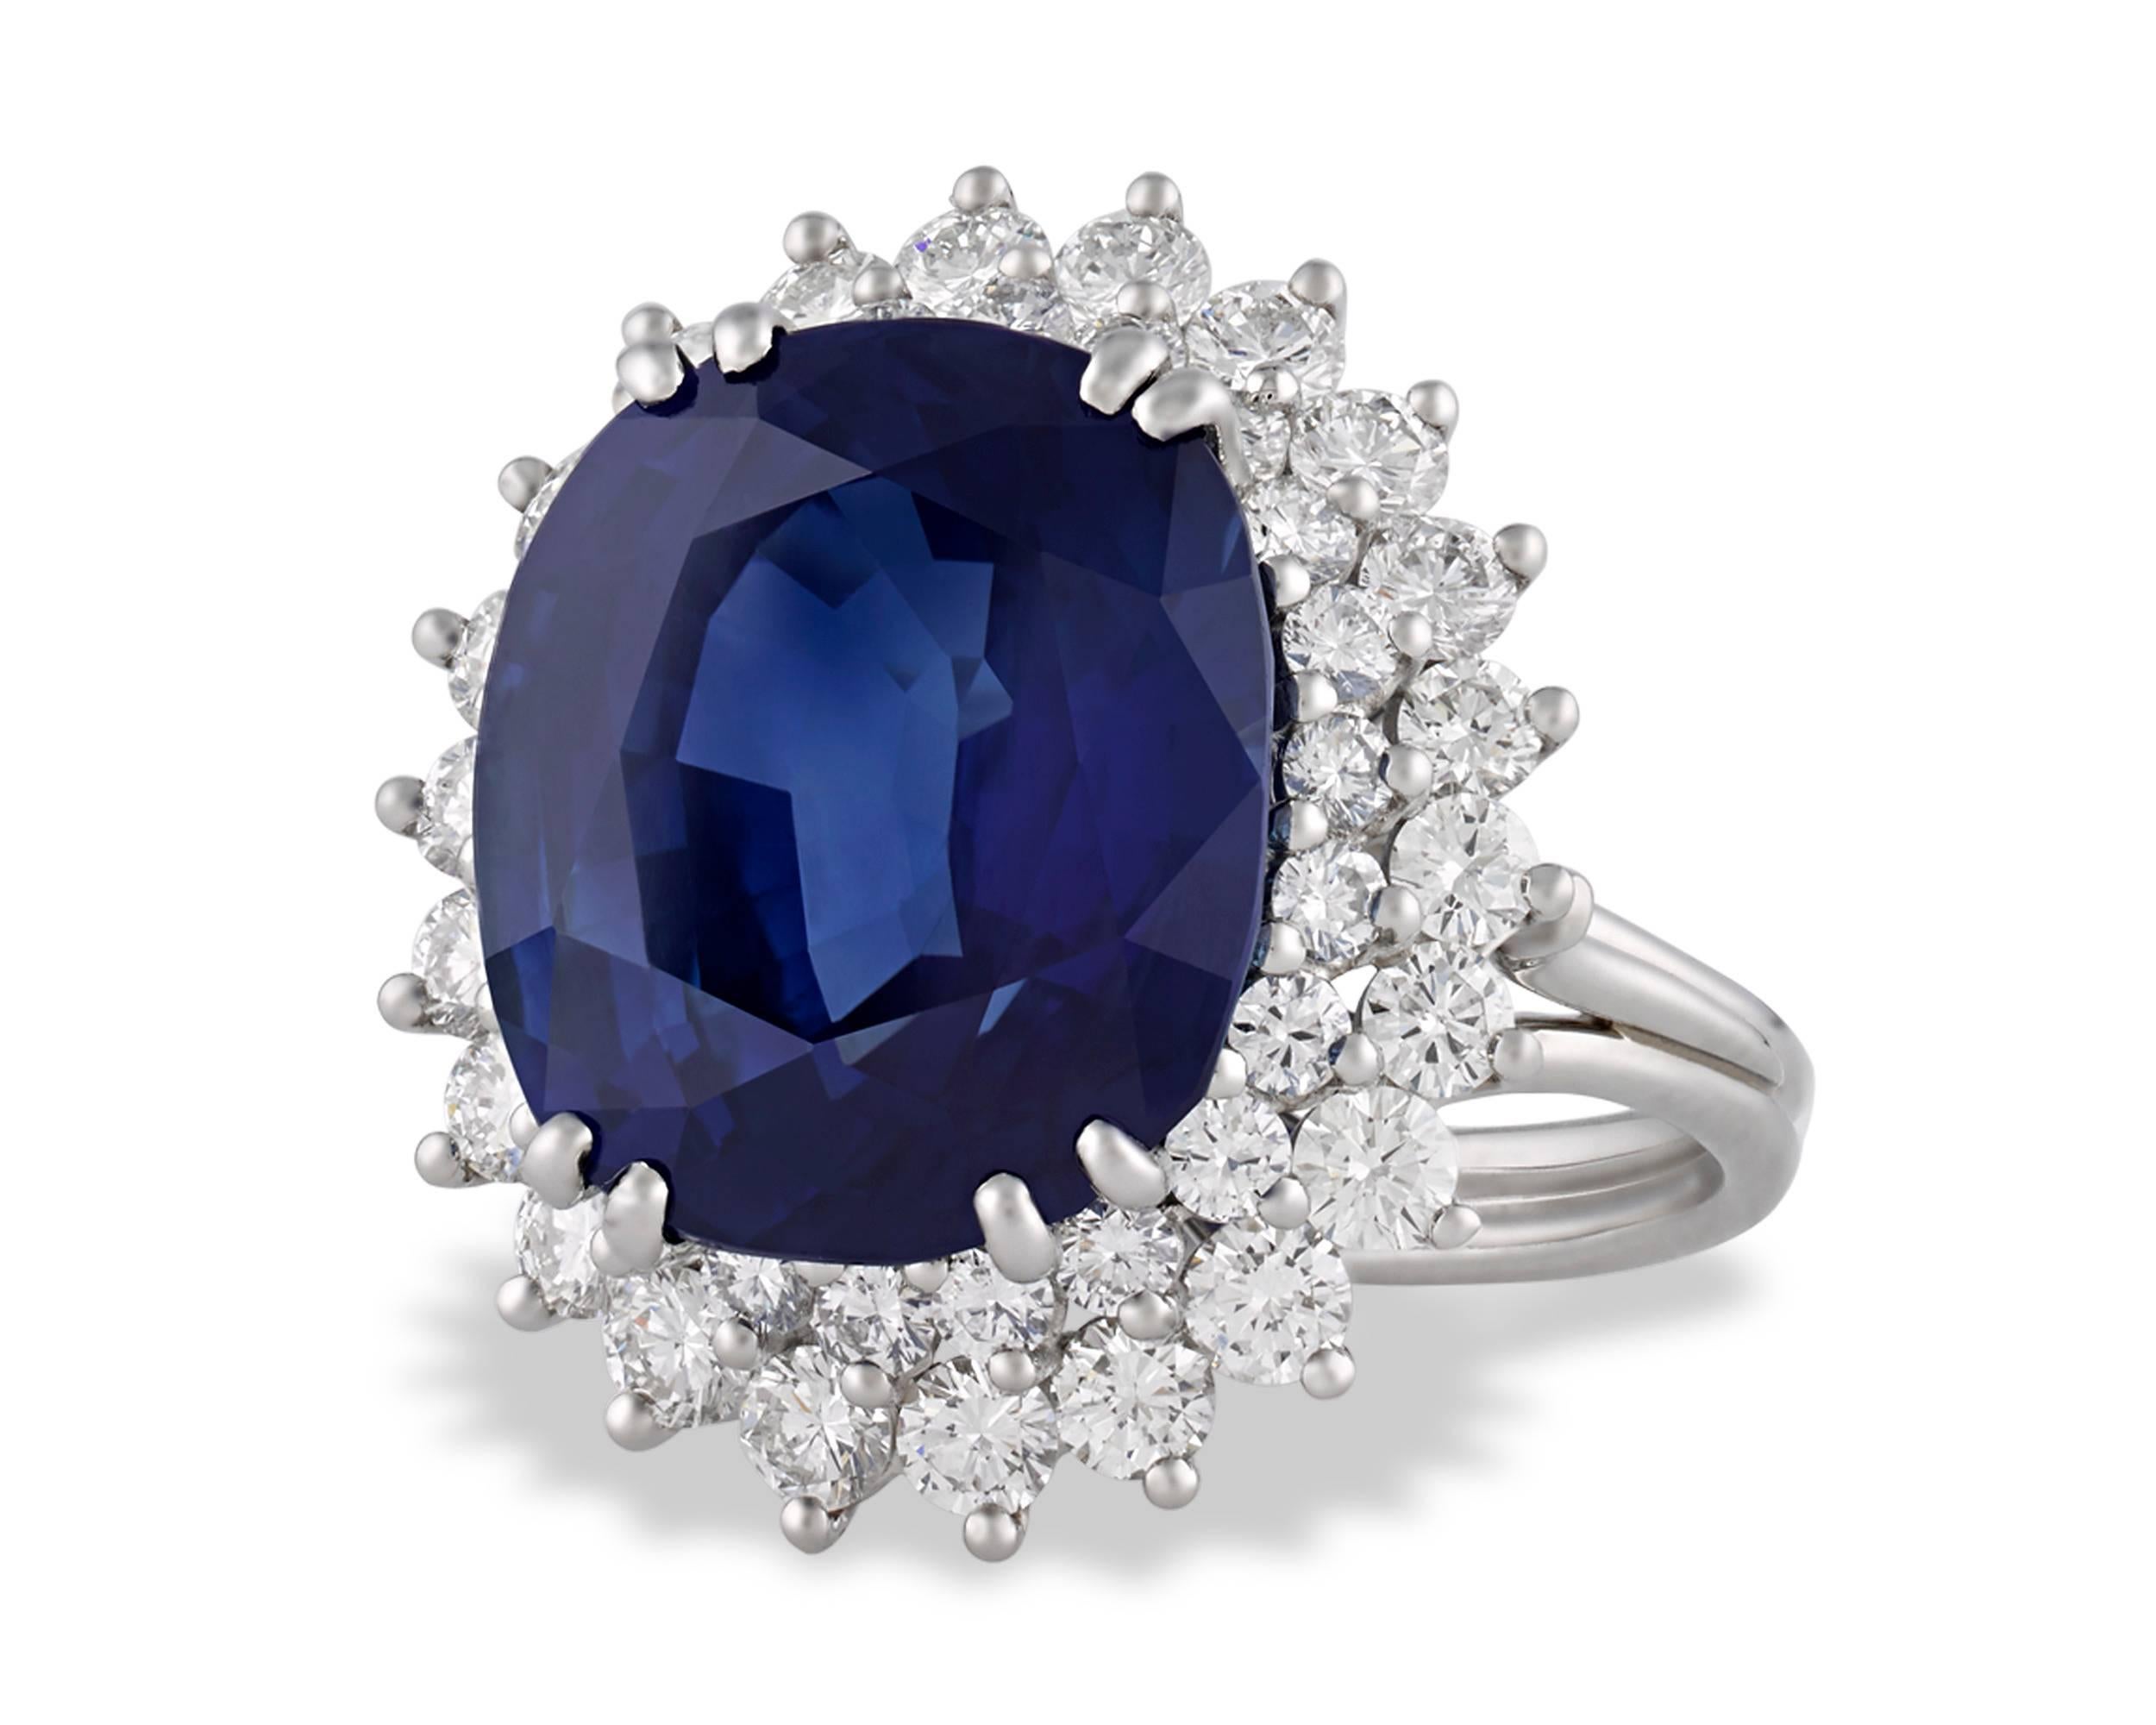 Centering this magnificent Tiffany & Co. ring is a breathtaking 10.93-carat sapphire certified by the American Gemological Laboratories to be of Ceylon (Sri Lanka) origin. With its stunning natural beauty and monumental size, this cushion-shaped,